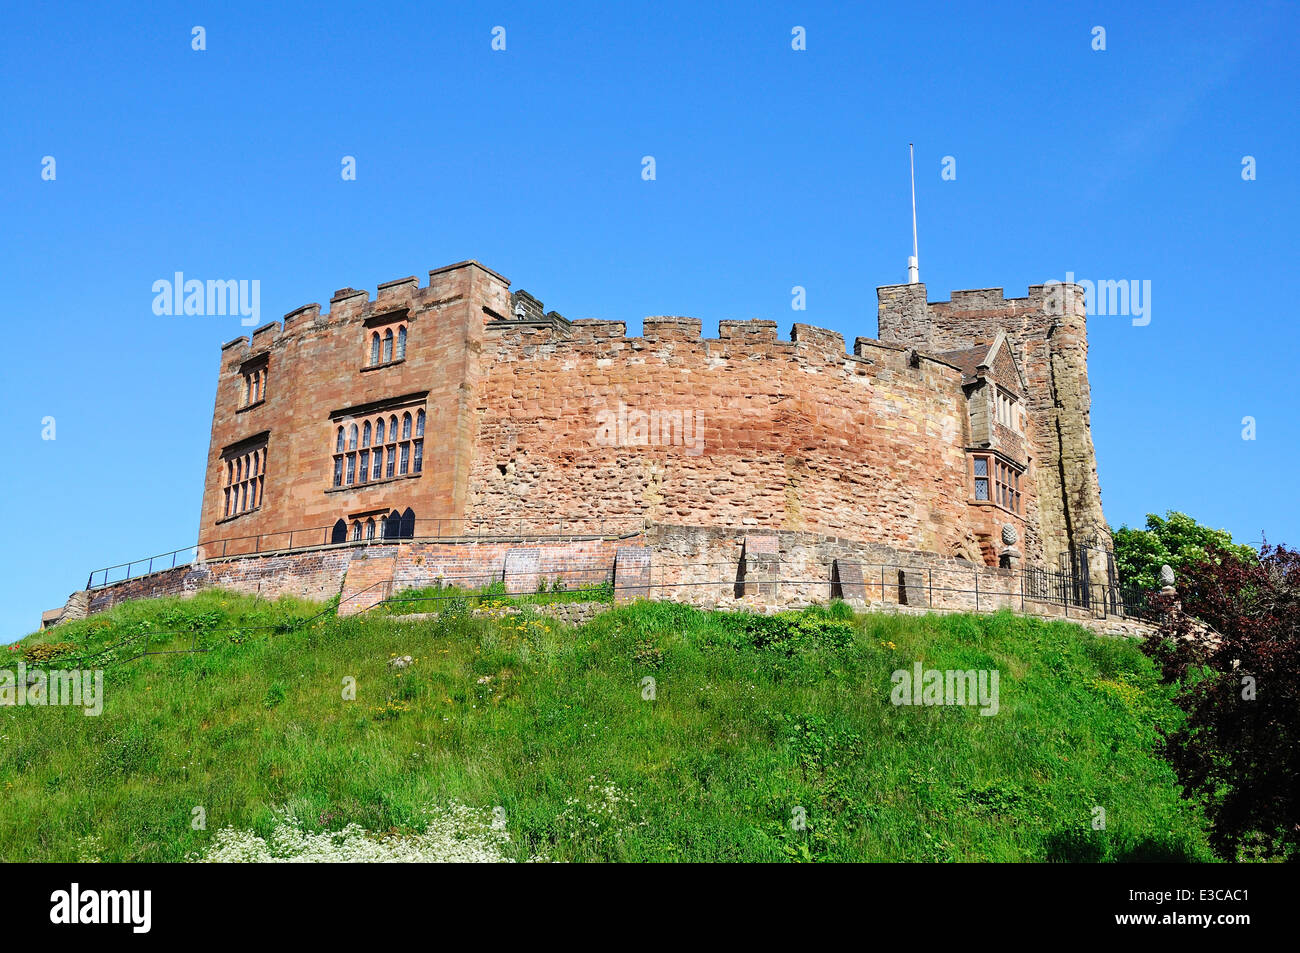 View of the Norman castle, Tamworth, Staffordshire, England, UK, Western Europe. Stock Photo